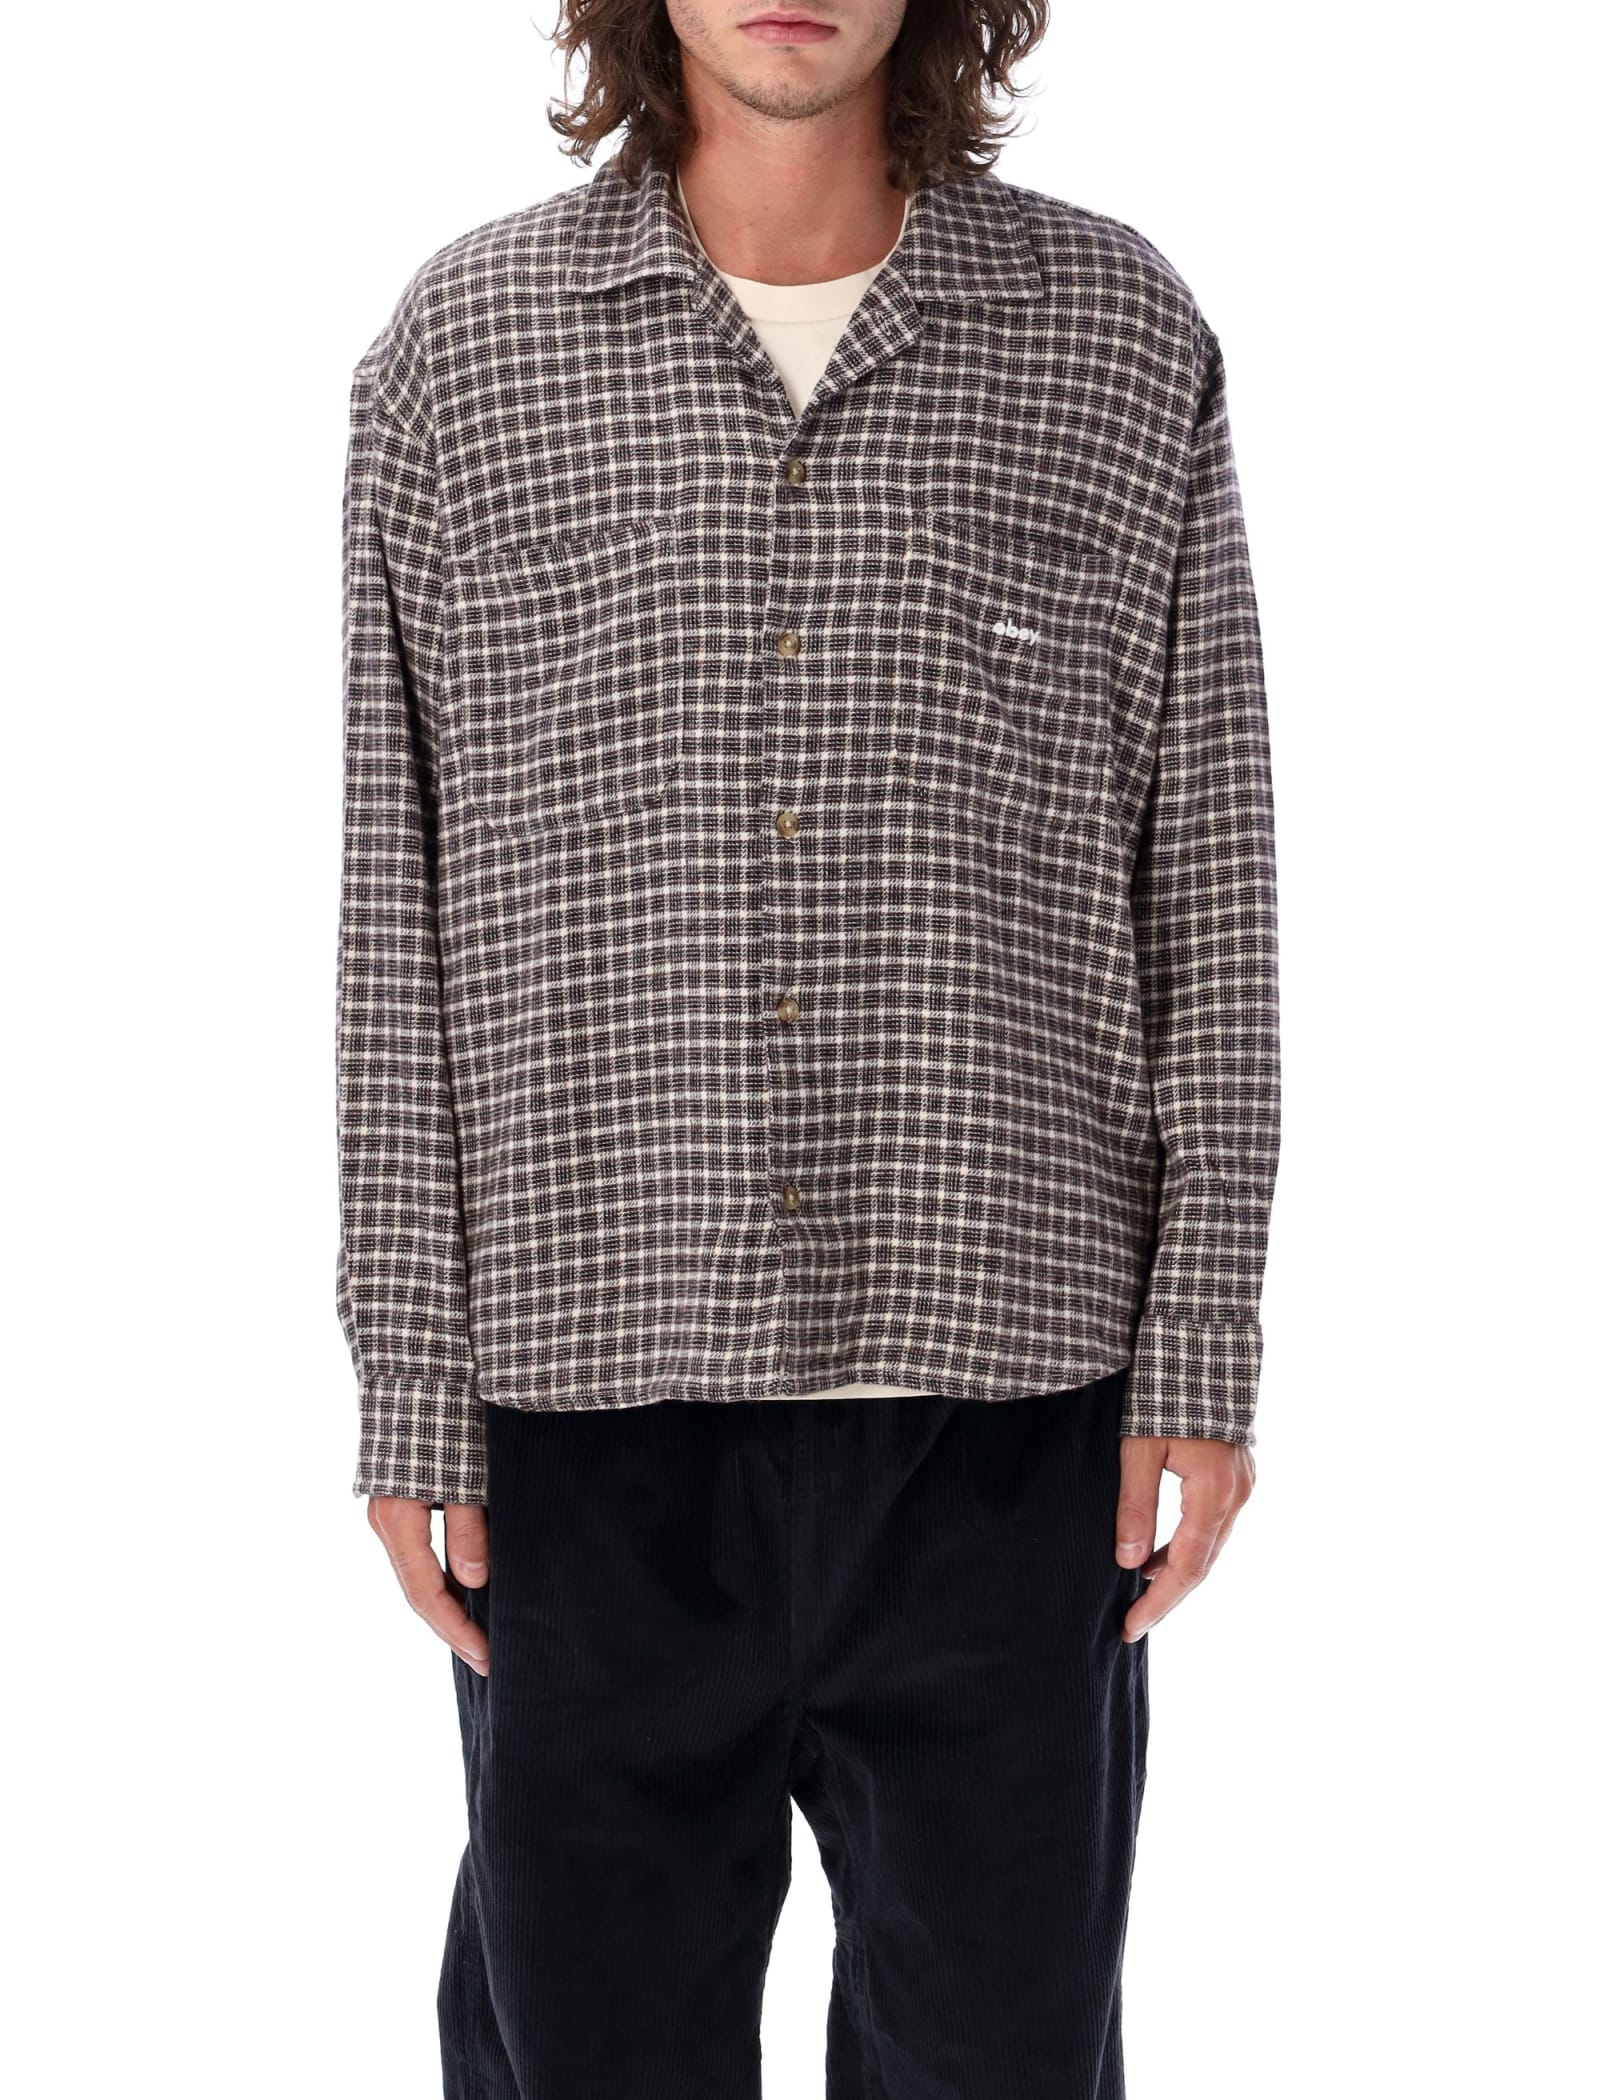 Obey Micro Plaid Shirt In Unbleached Multi